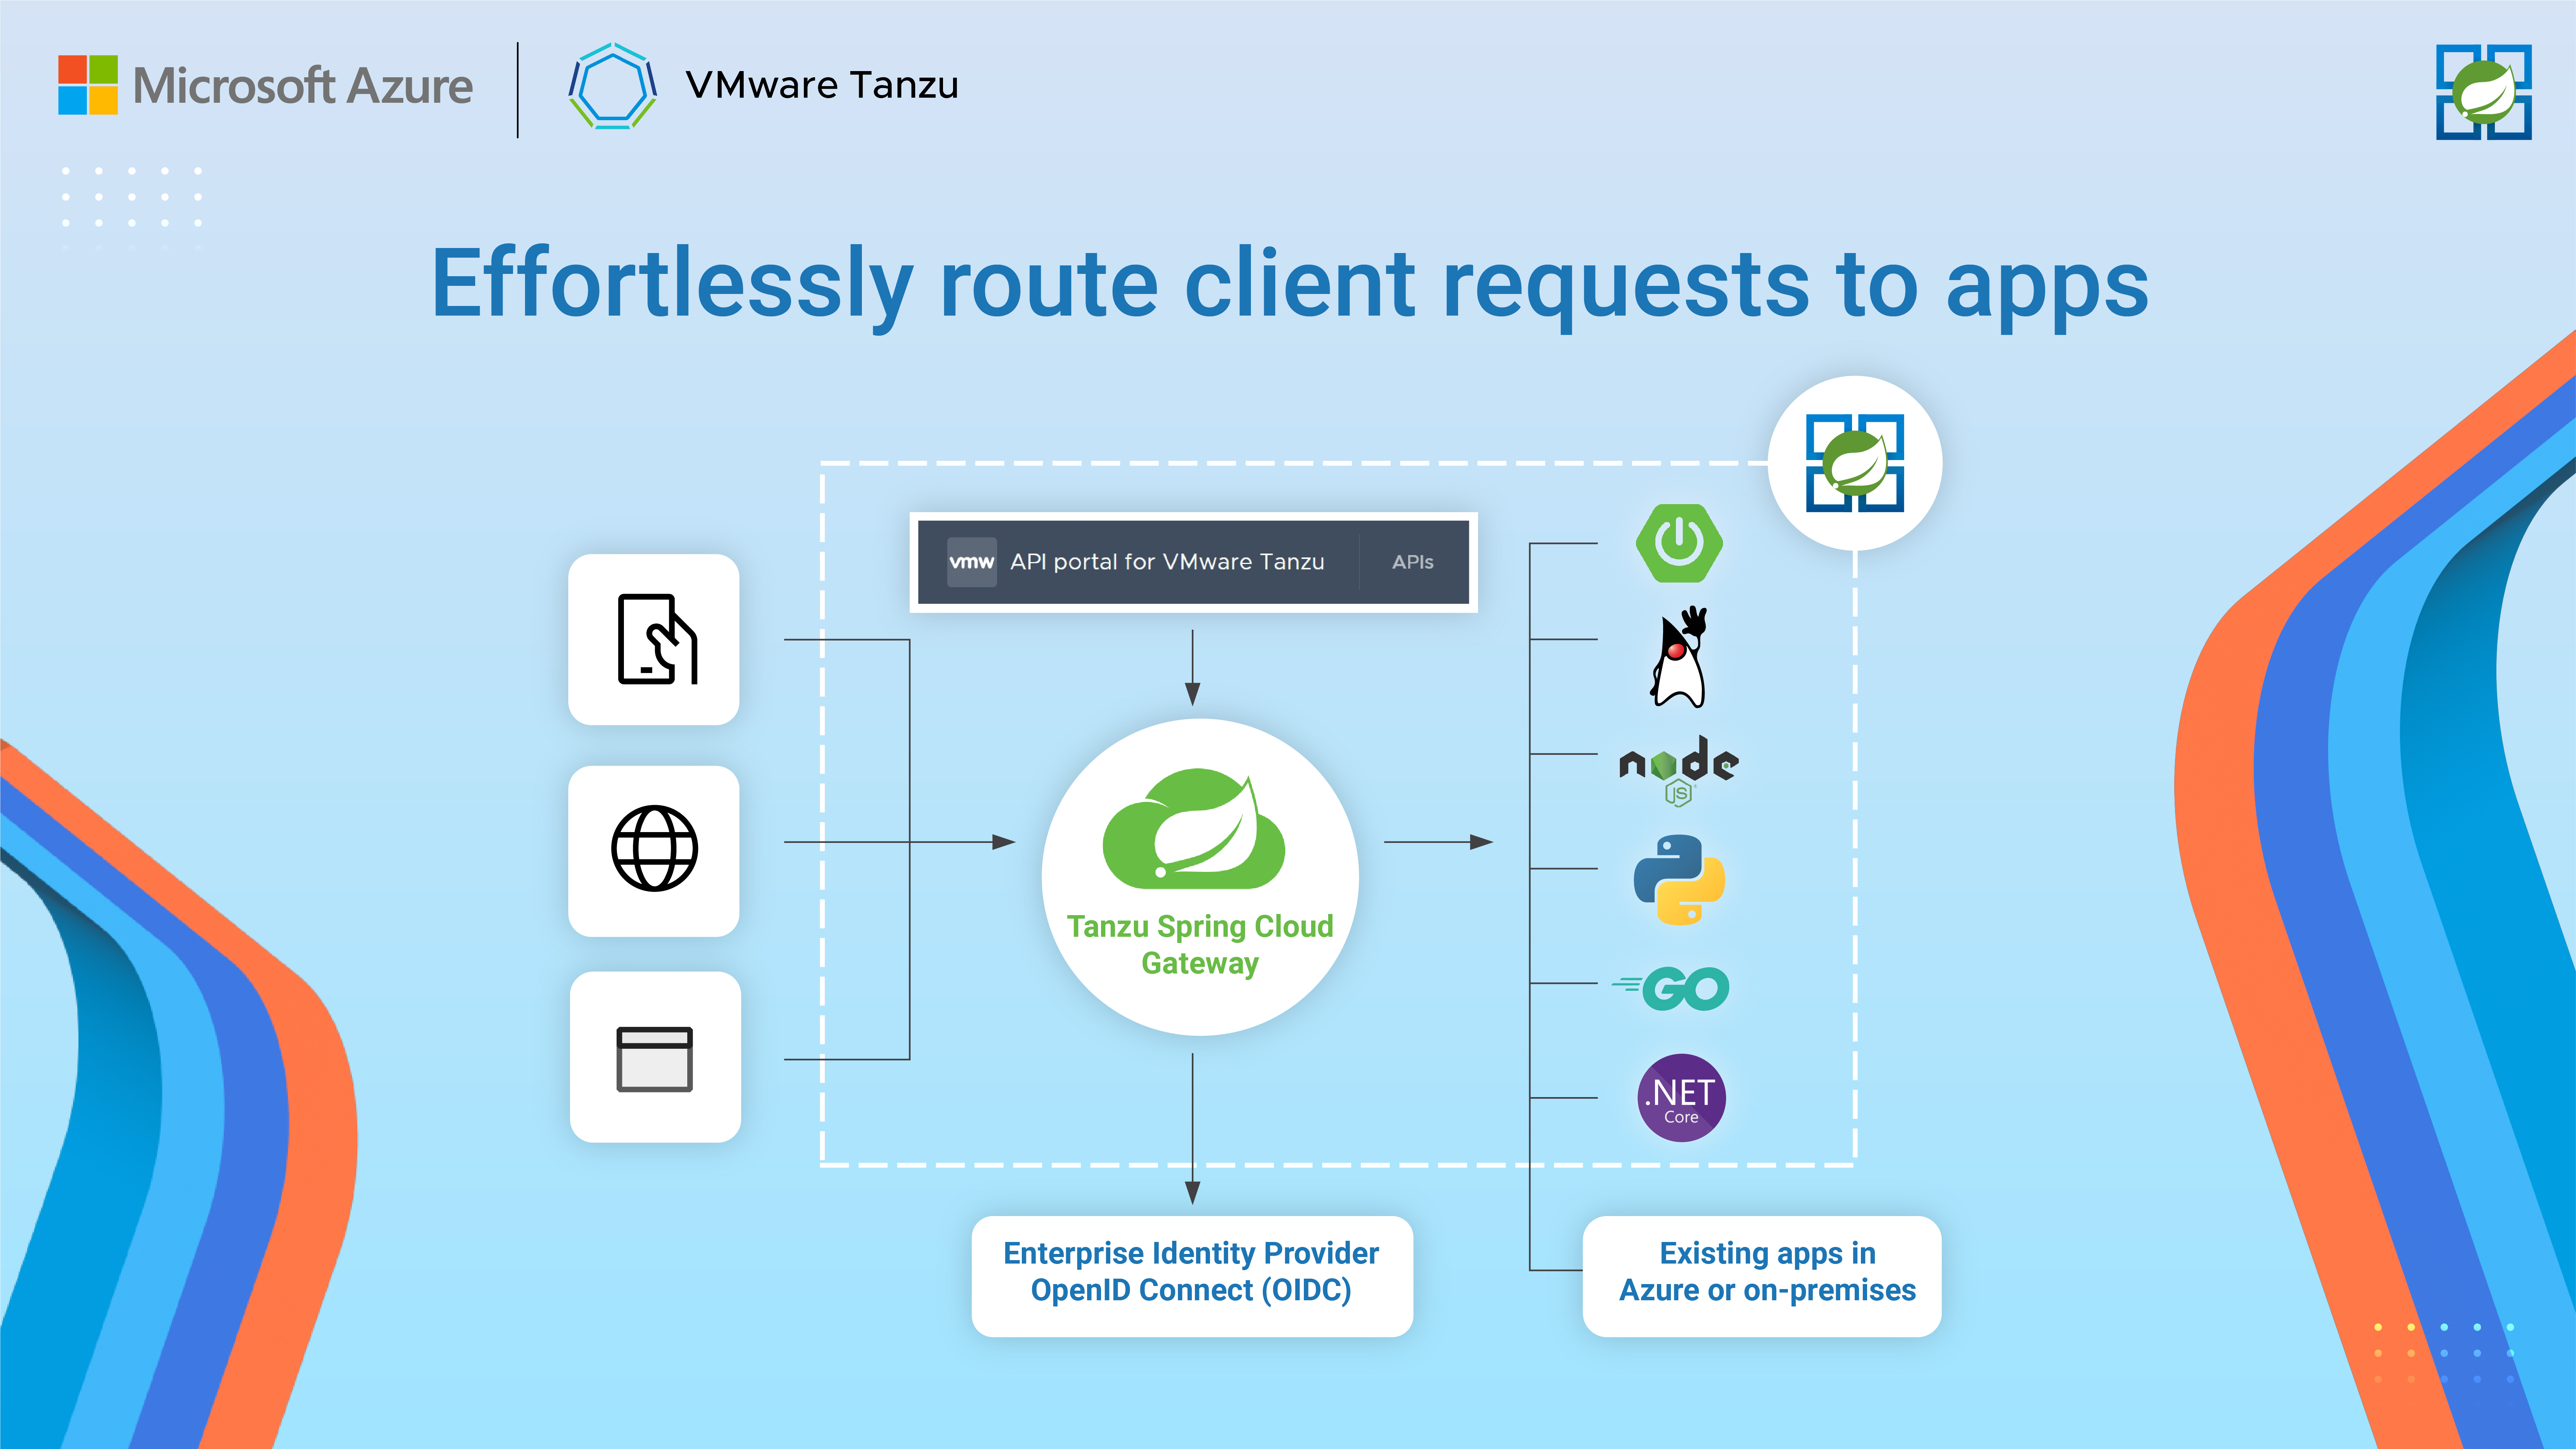 Fully managed Spring Cloud Gateway for Tanzu routes diverse client requests to applications in Azure Spring Cloud, Azure and/or on-premises systems